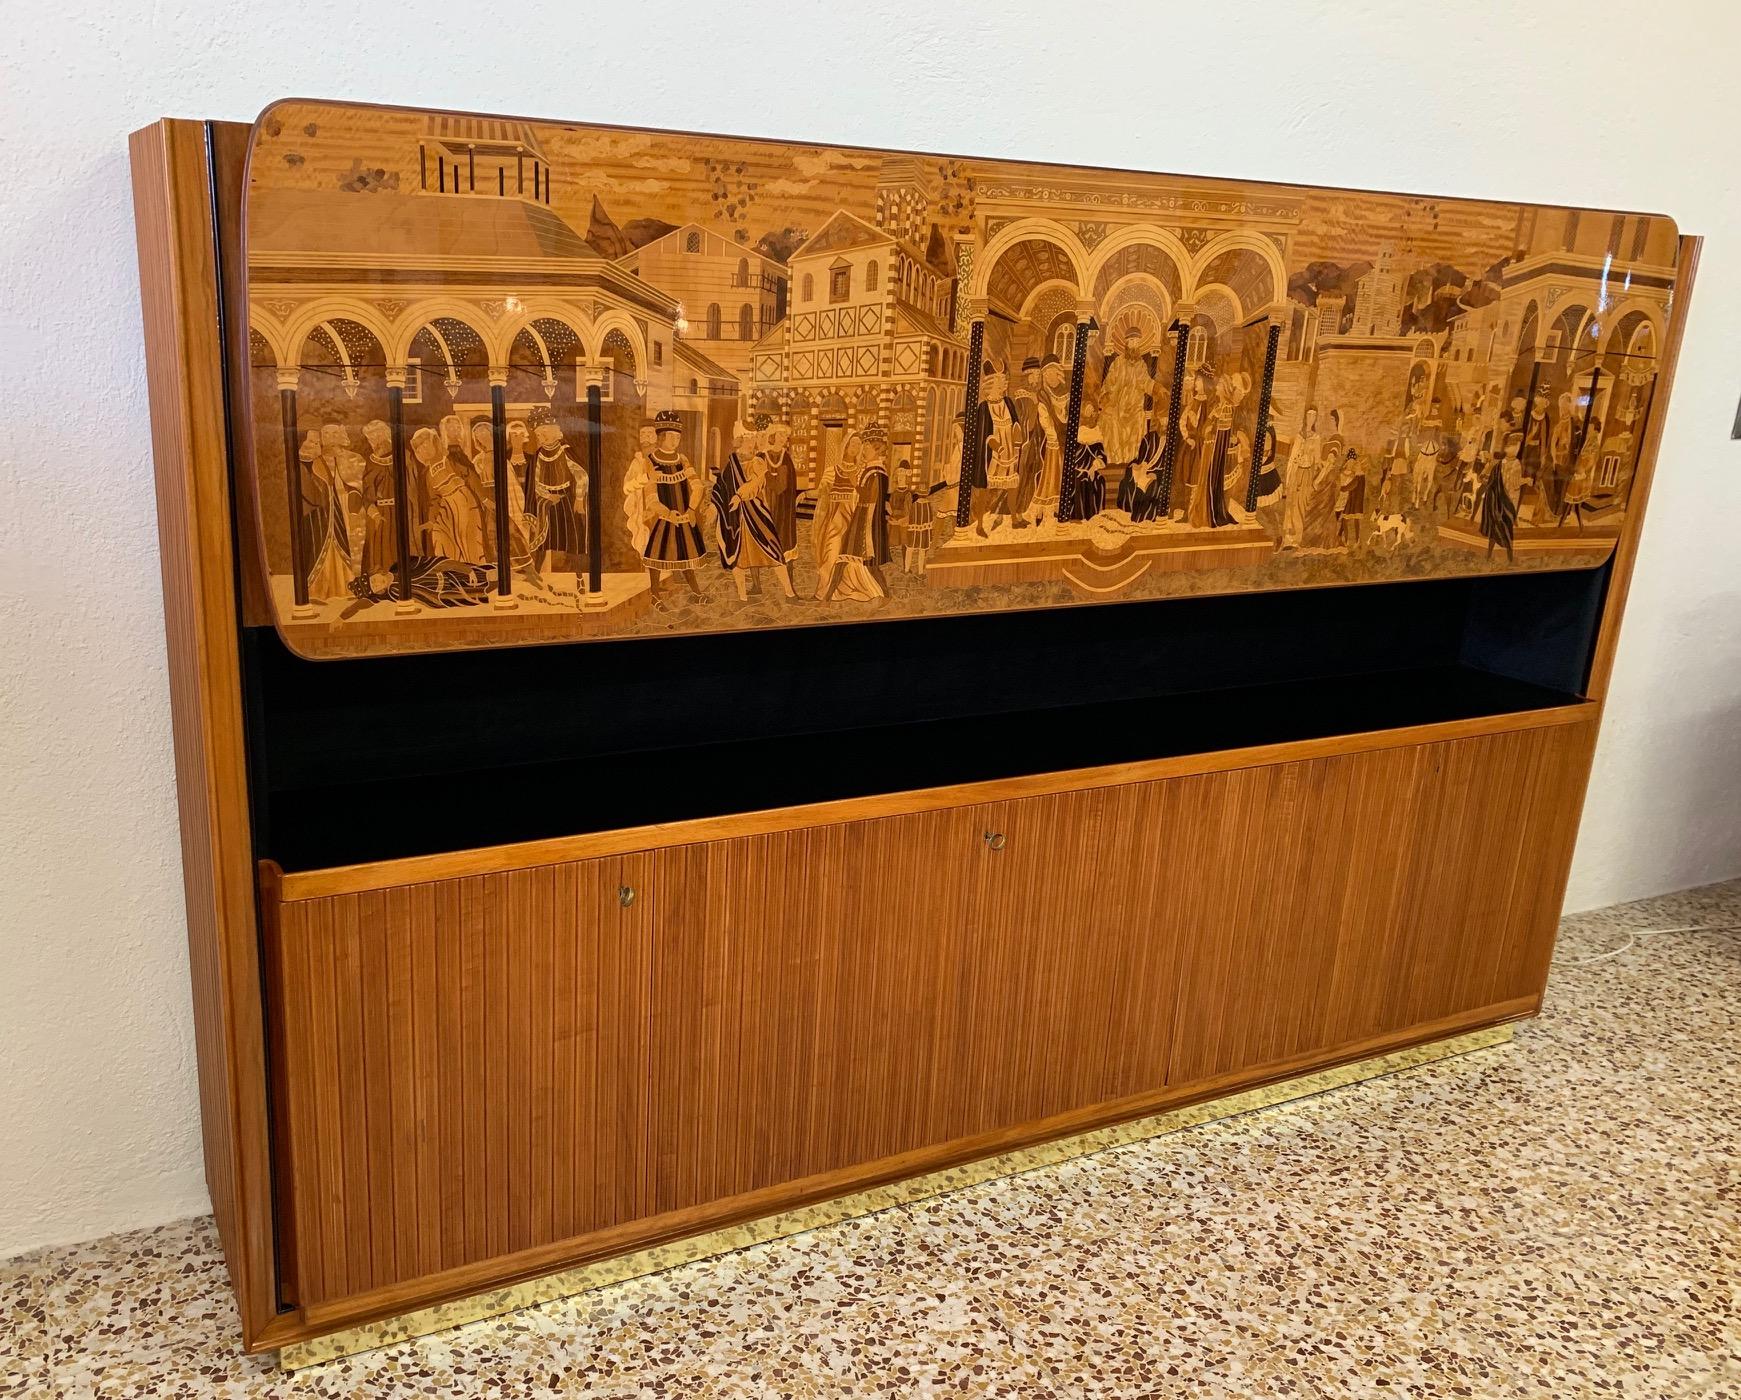 This item was produced in the 1940s in Italy by Vittorio Dassi for the ' Permanente Mobili Cantù'.
The cabinet is completely made of cherrywood with black lacquered profiles.
The large central door has a beautiful inlay with innumerable essence